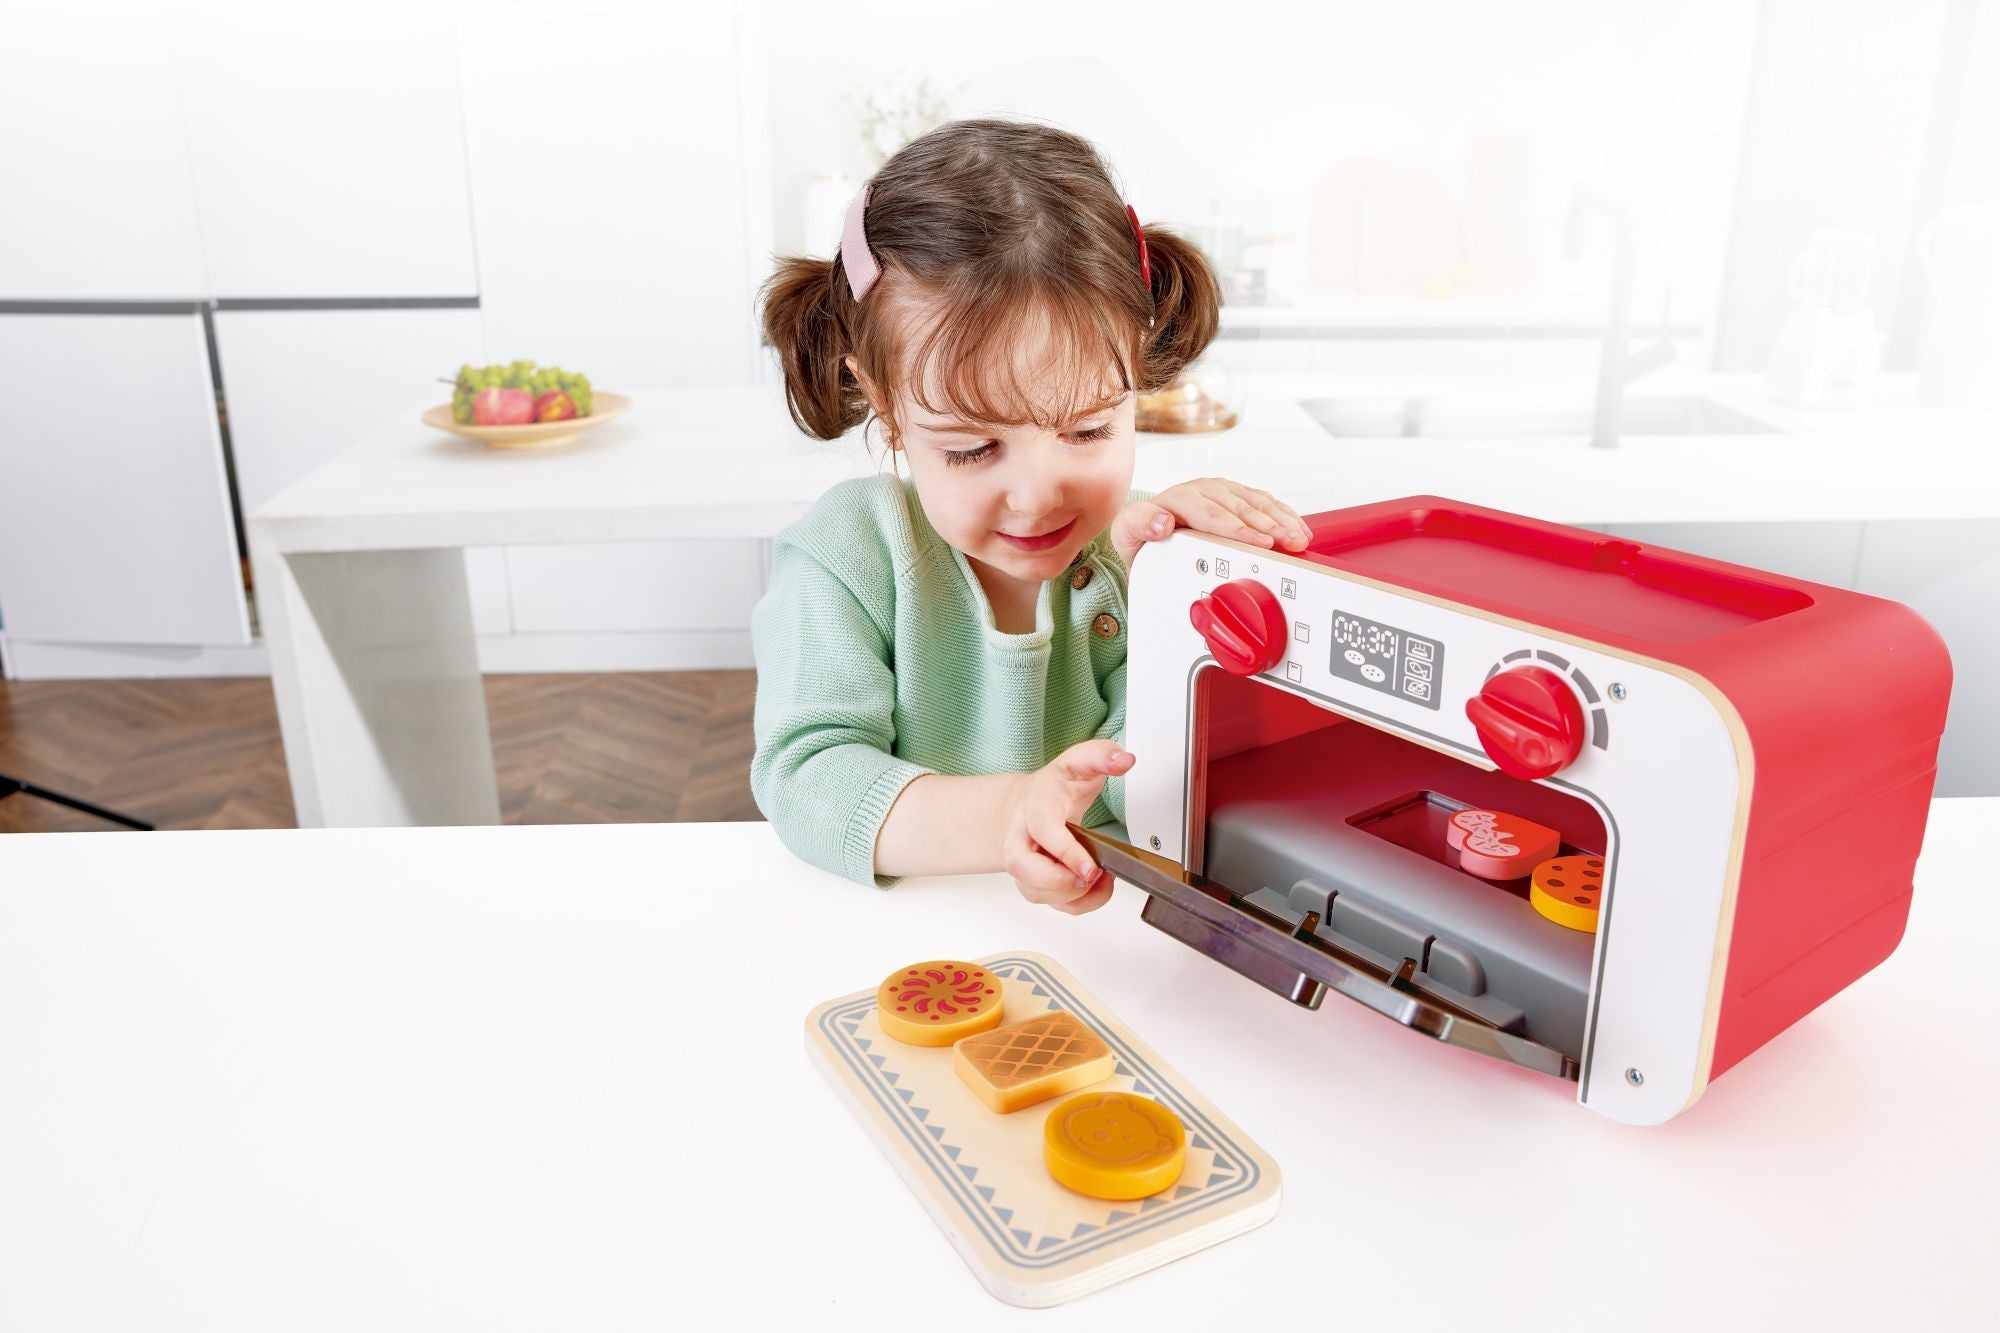 MY BAKING OVEN WITH MAGIC COOKIES - THE TOY STORE